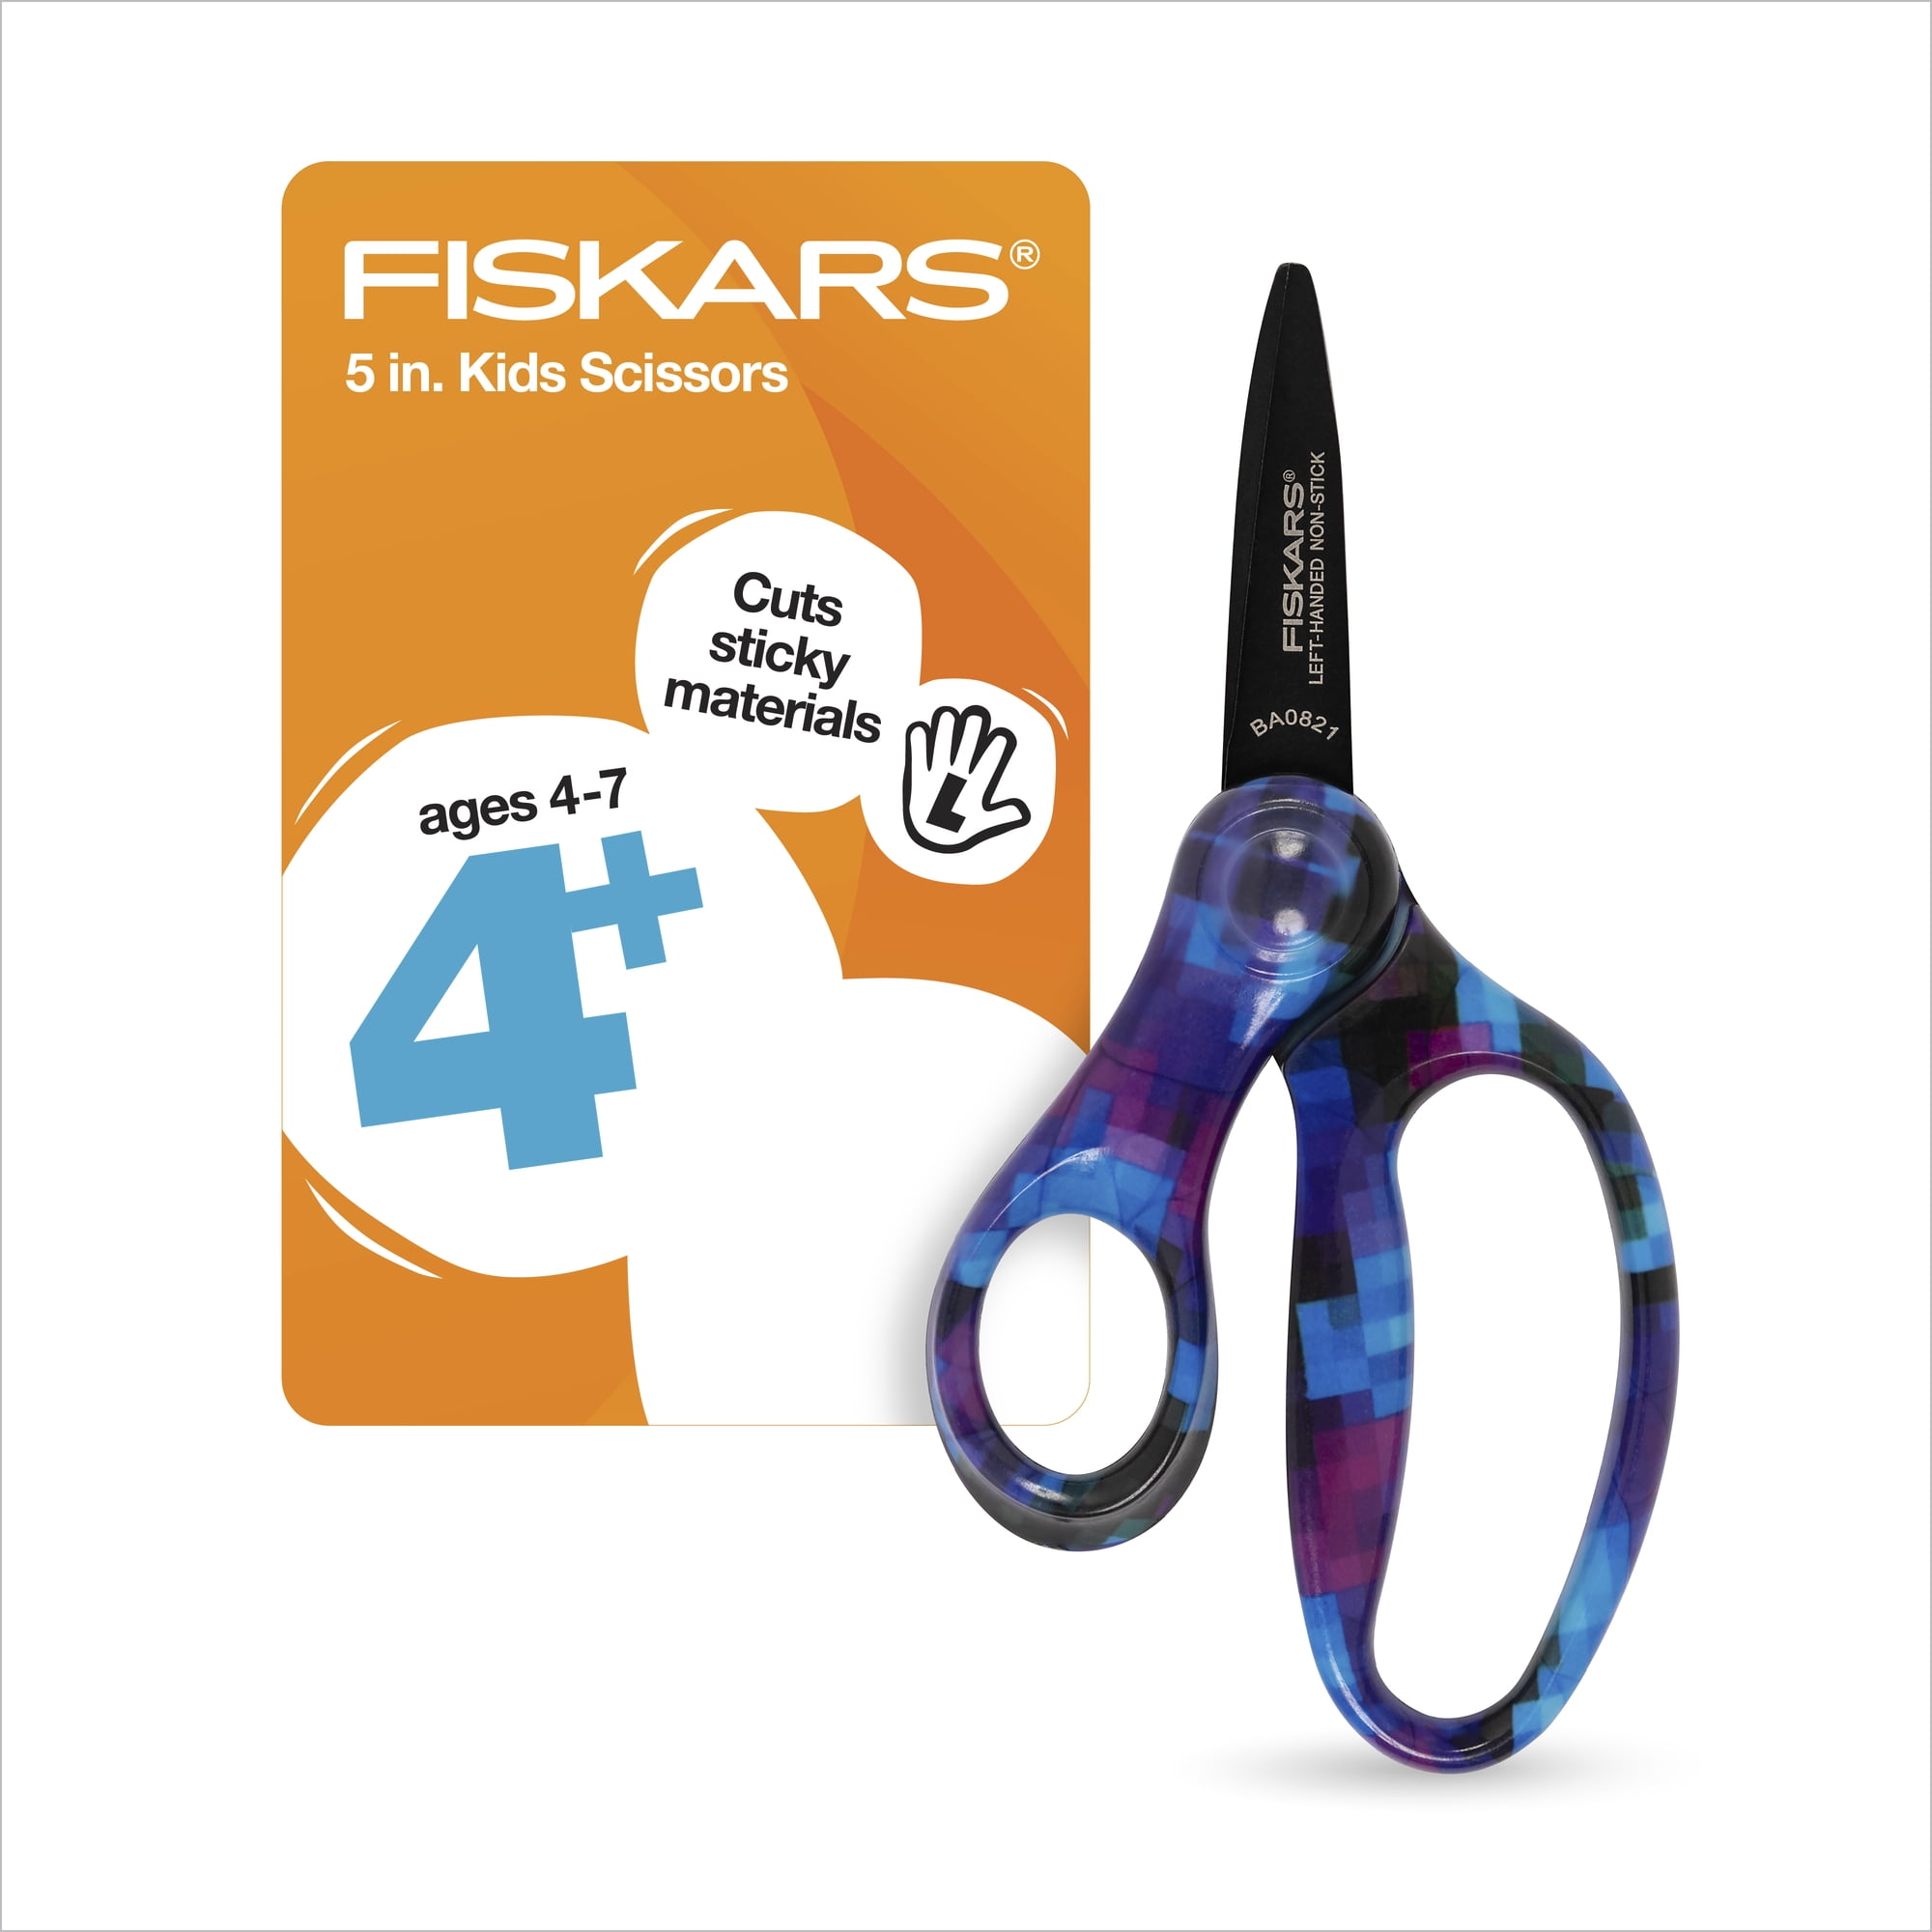 Fiskars Decorative 6 1/2 Stainless Steel Craft Scissors, Pointed Tip,  Assorted Colors, 6/Pack (SZ667)